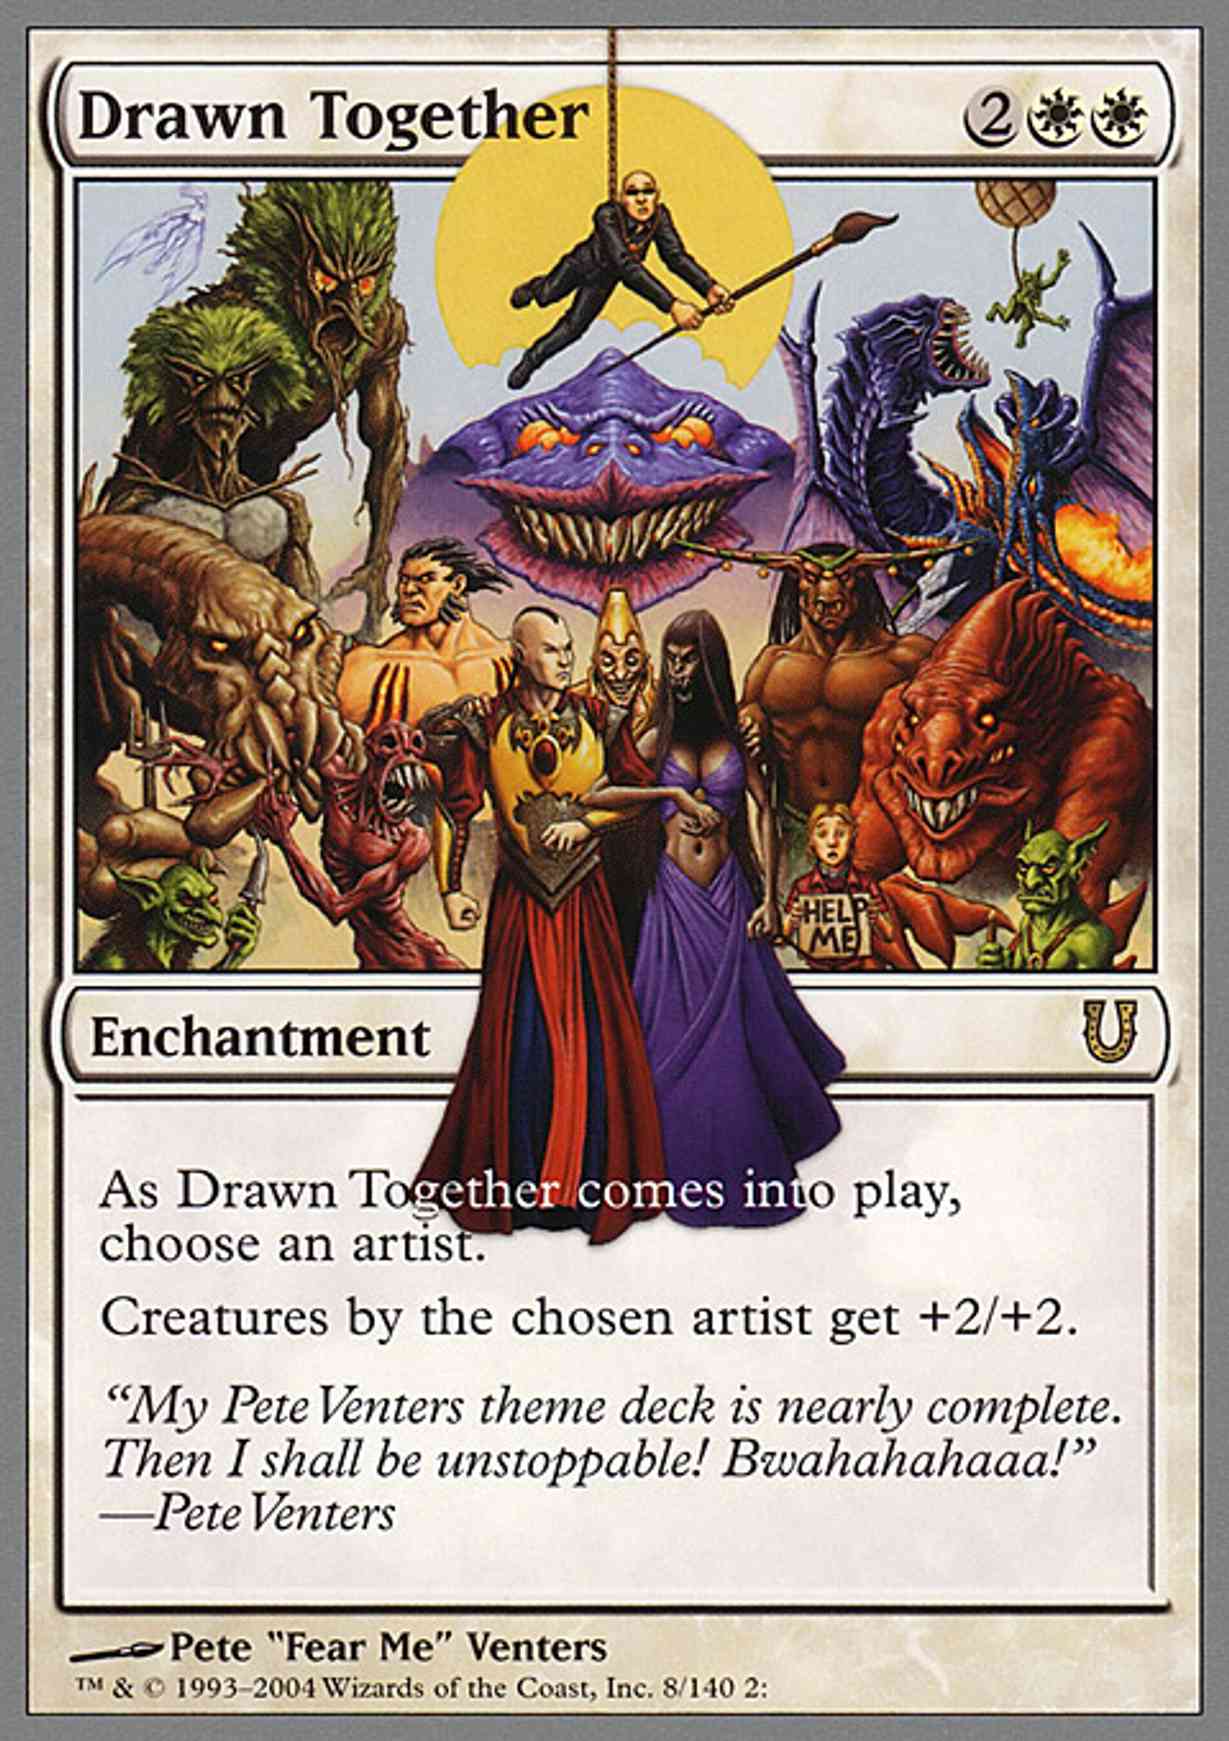 Drawn Together magic card front